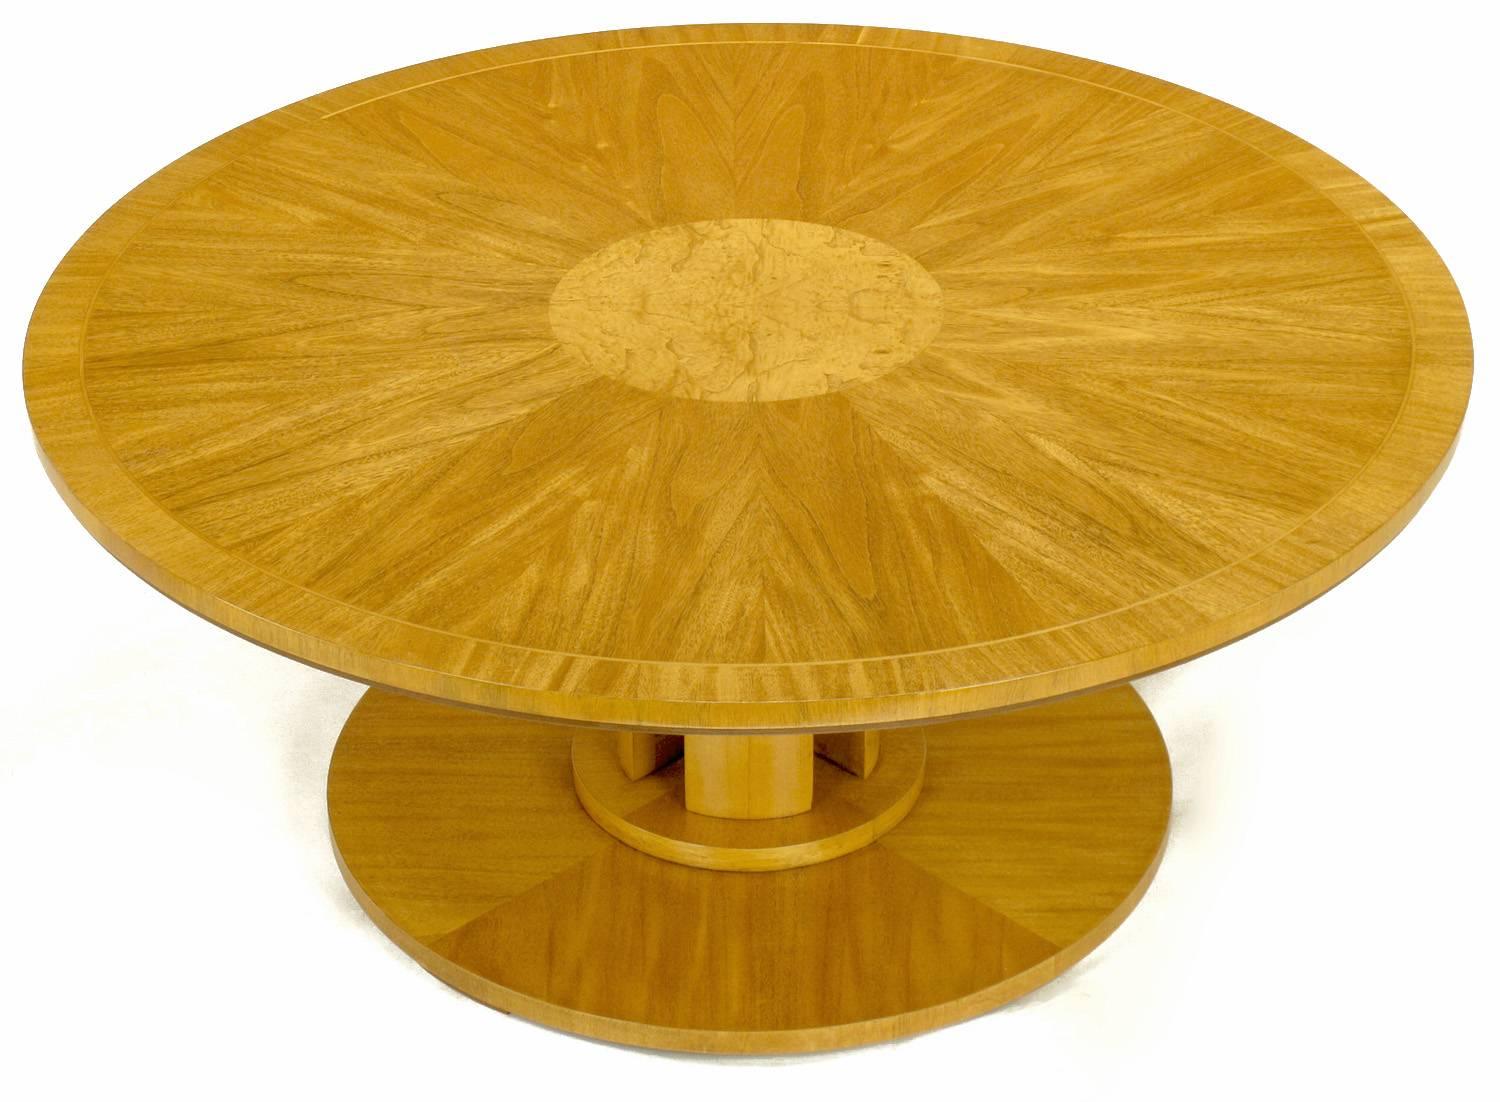 Rare Charles Pfister for Baker primavera mahogany coffee table with inlaid olive ash burl center disc. Open pedestal base, parquetry sunburst like top with contrasting grain border.